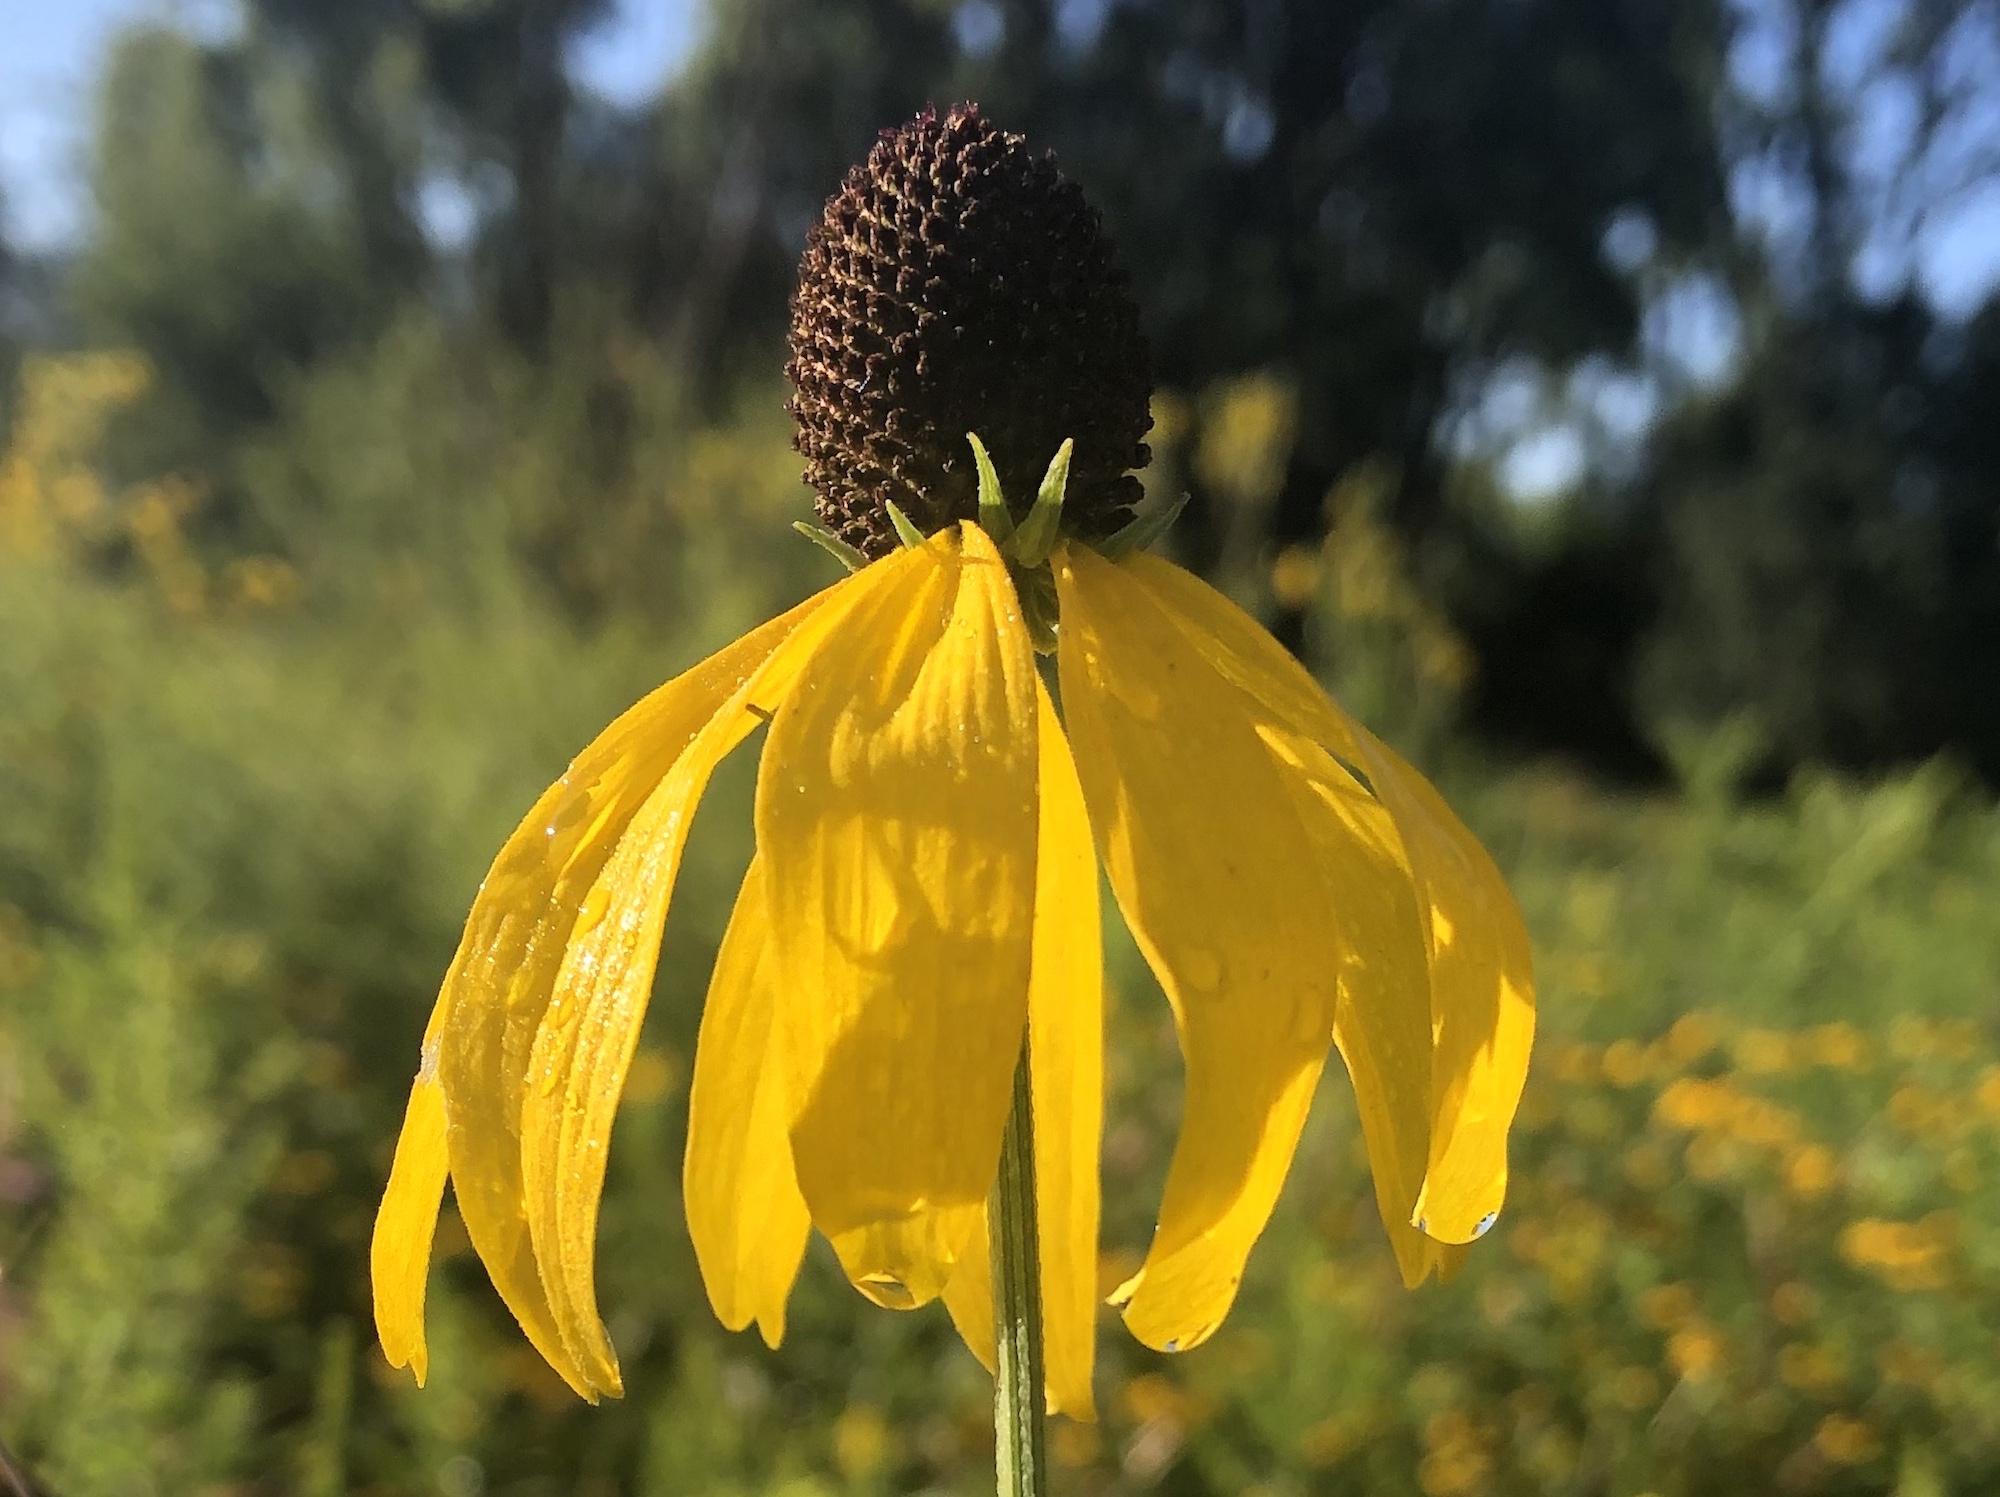 Gray-headed coneflower on the banks of the Marion Dunn Pond i in Madison, Wisconsin on August 11, 2020.